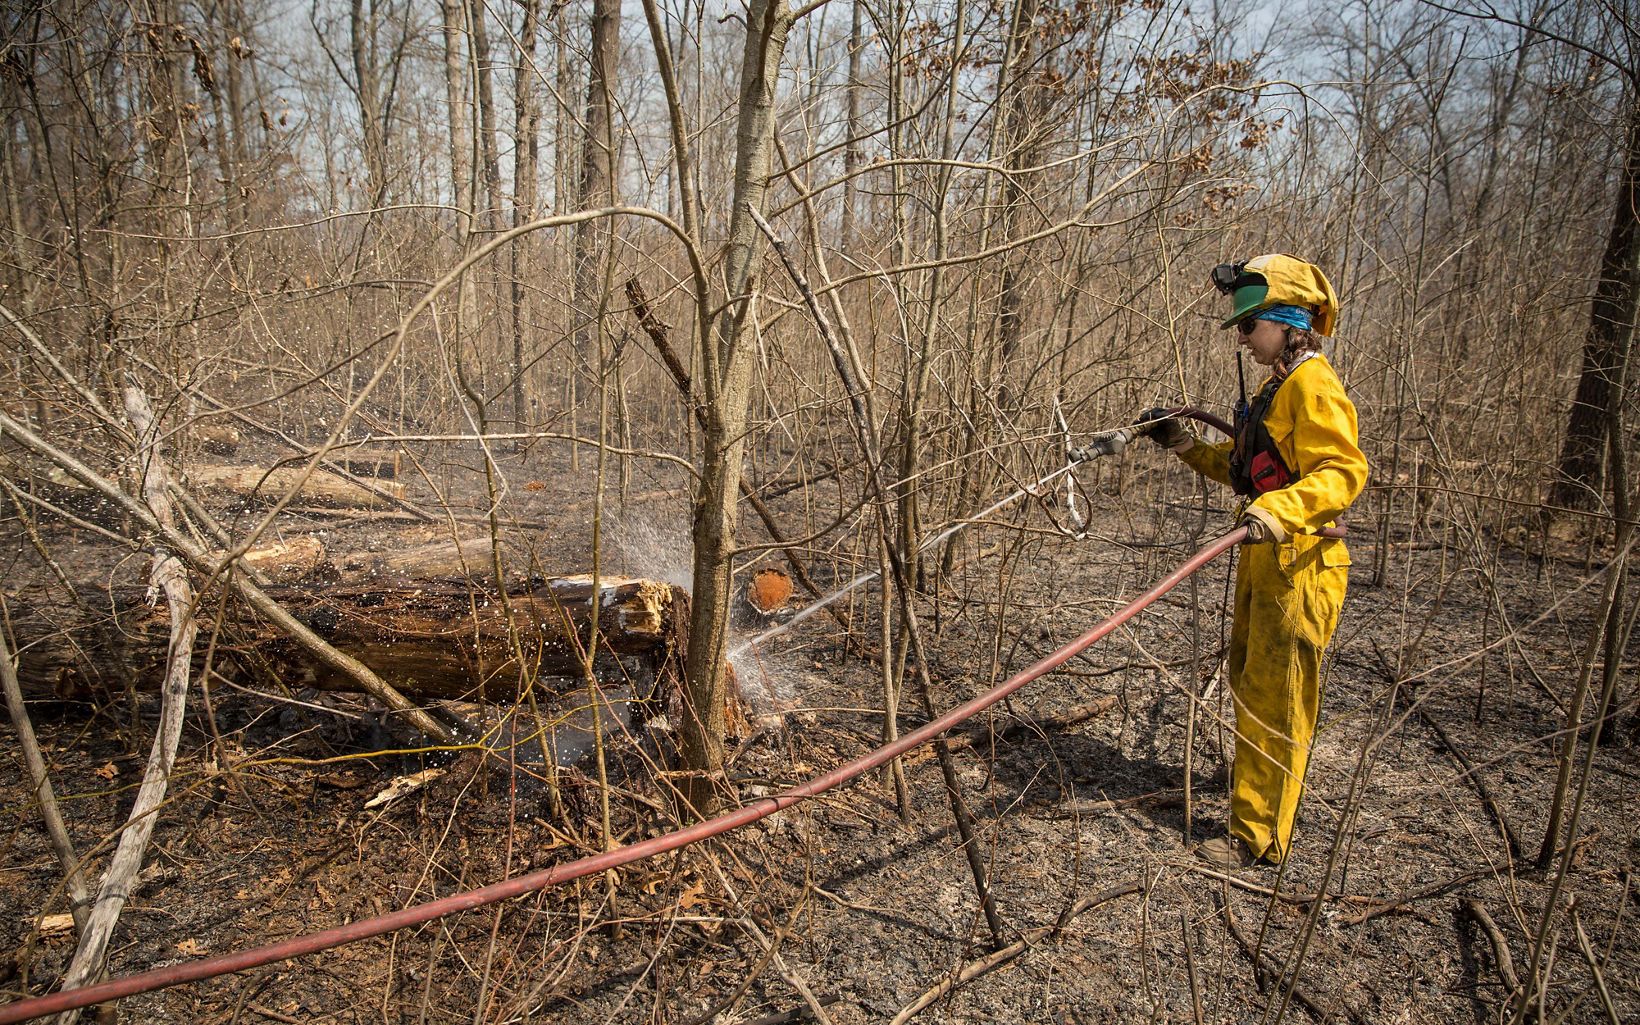 A man in yellow holds a long hose in the woods.